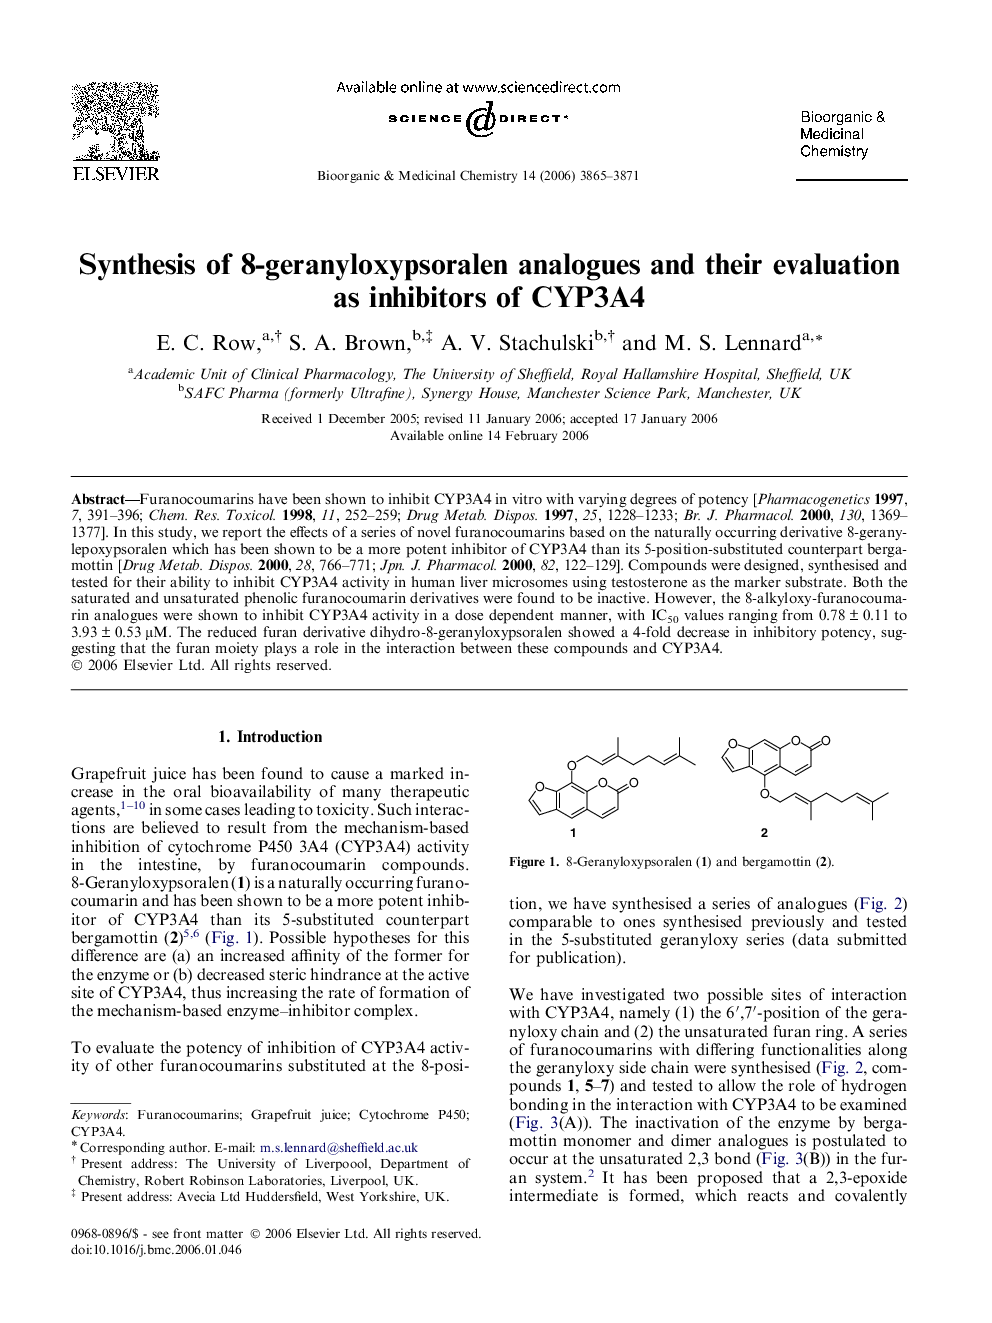 Synthesis of 8-geranyloxypsoralen analogues and their evaluation as inhibitors of CYP3A4